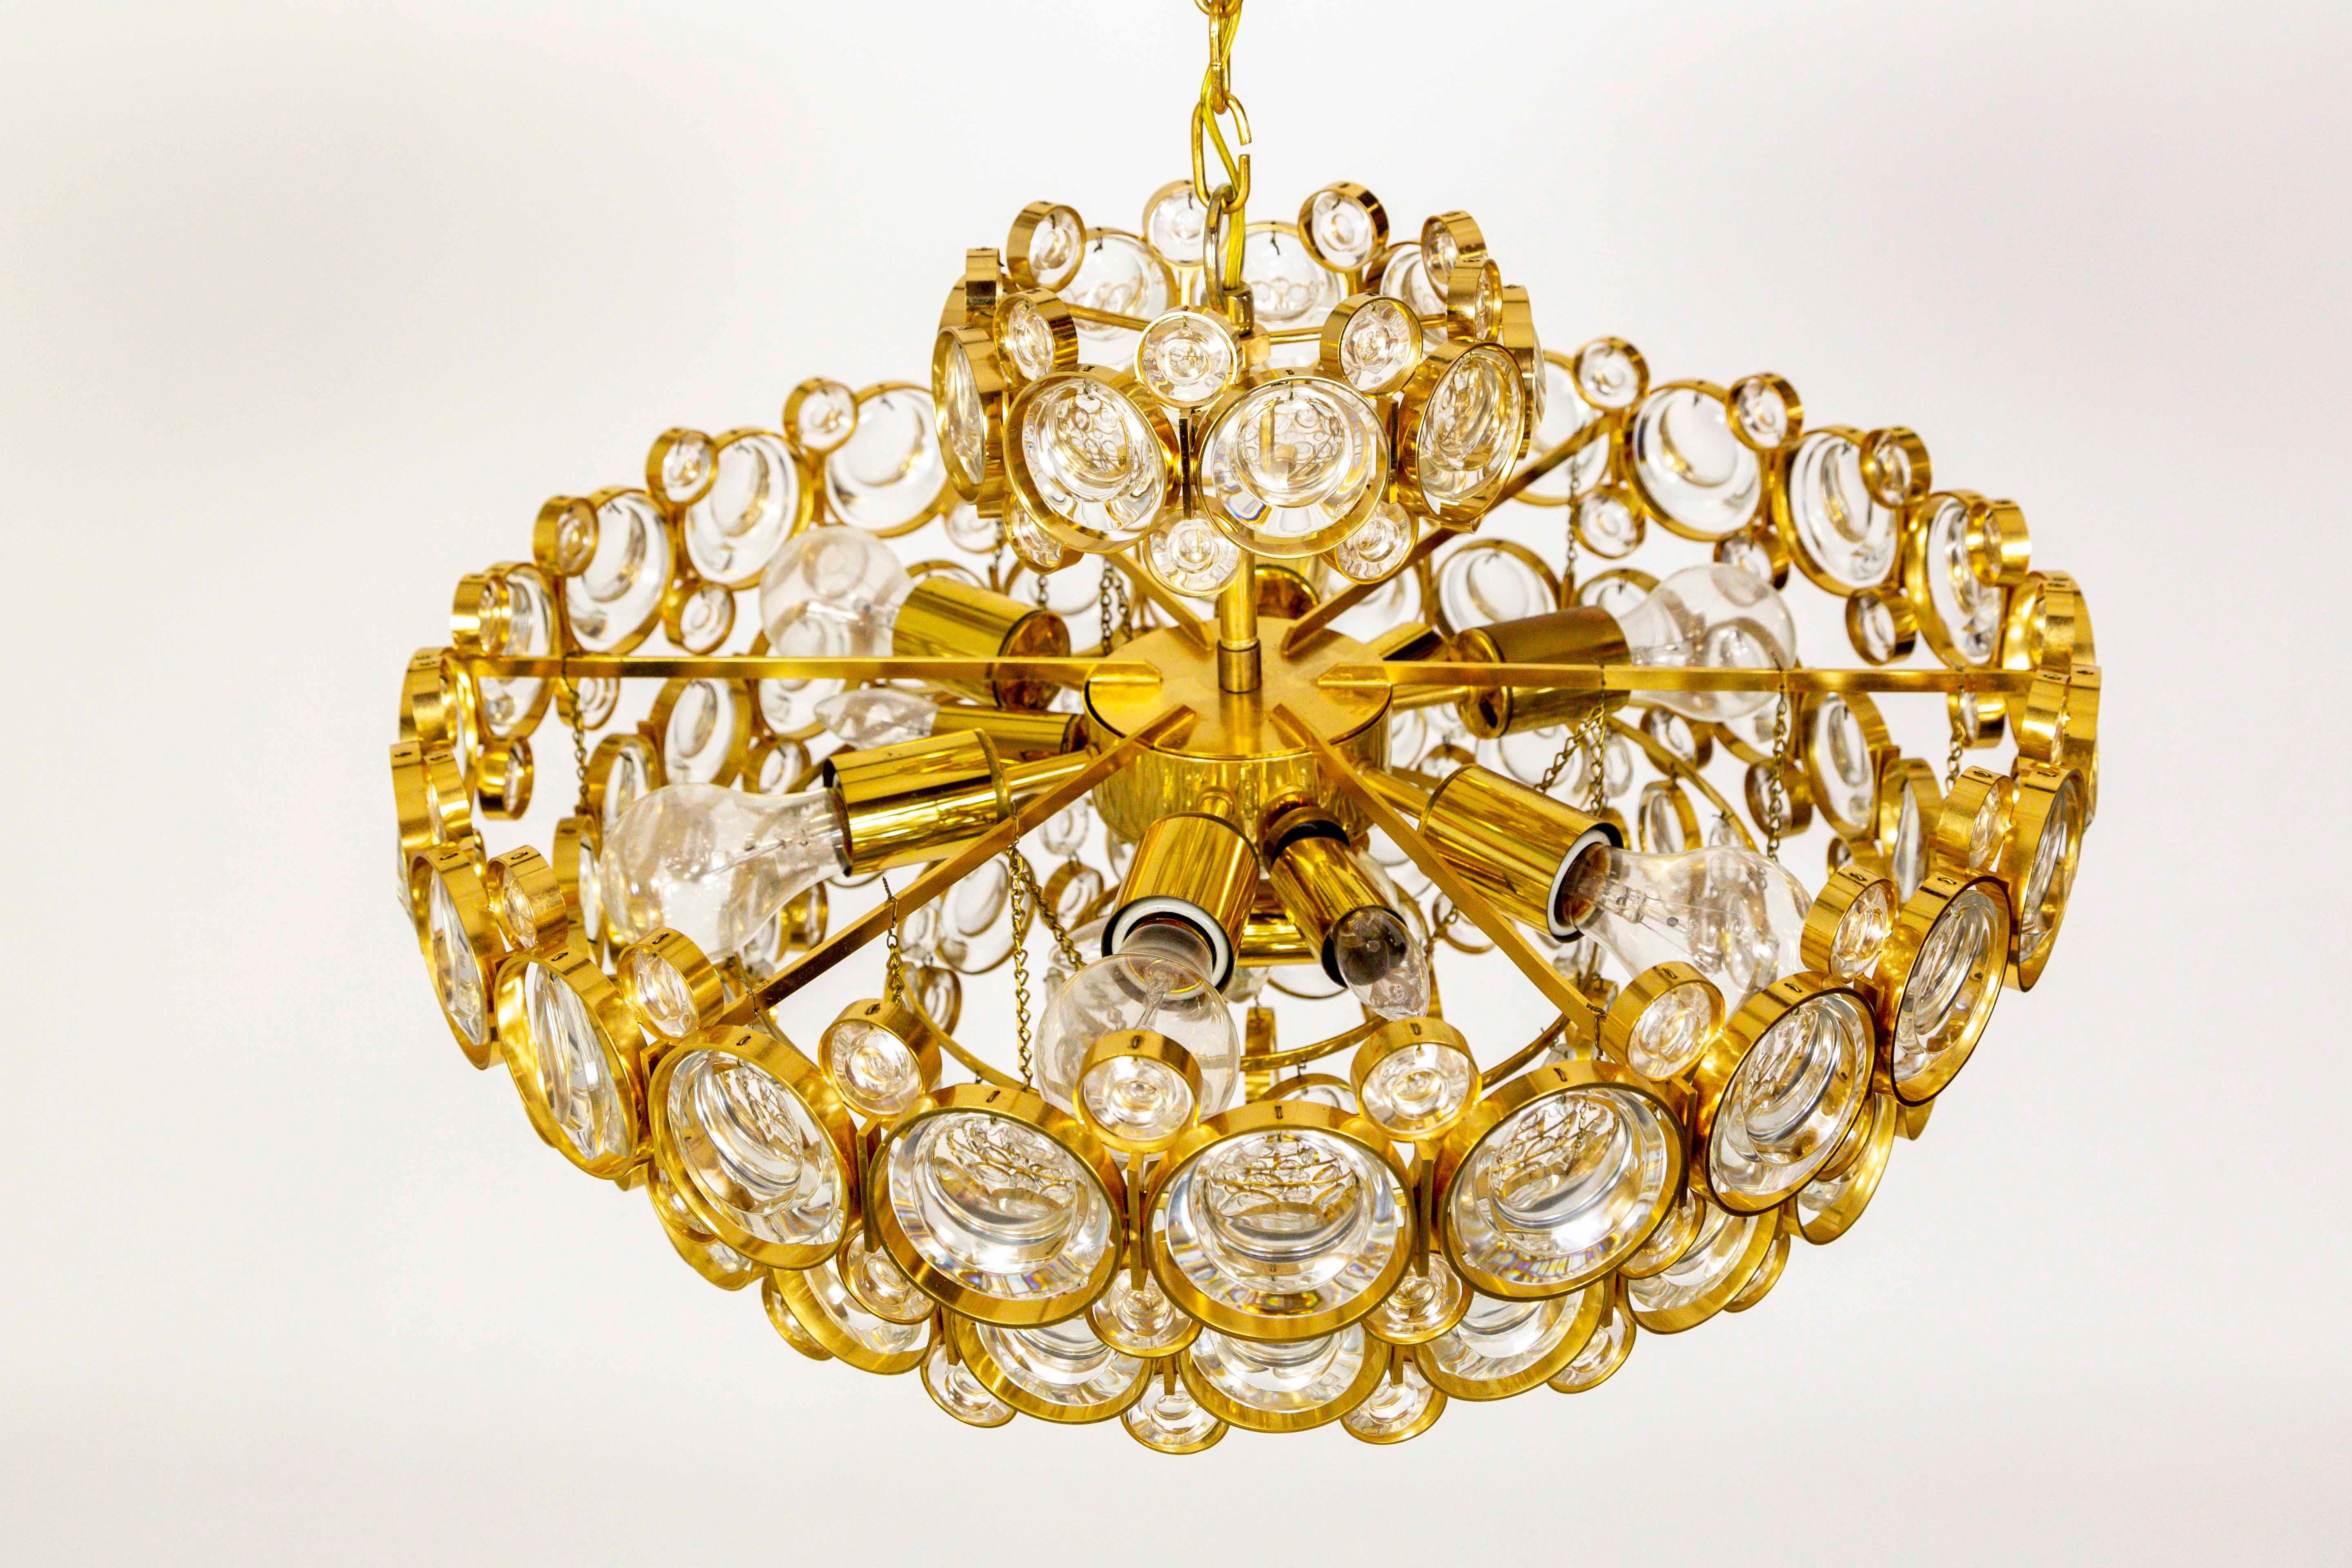 German Circular Gilt Brass and Optical Lens Crystal Multi Tier Chandelier by Palwa